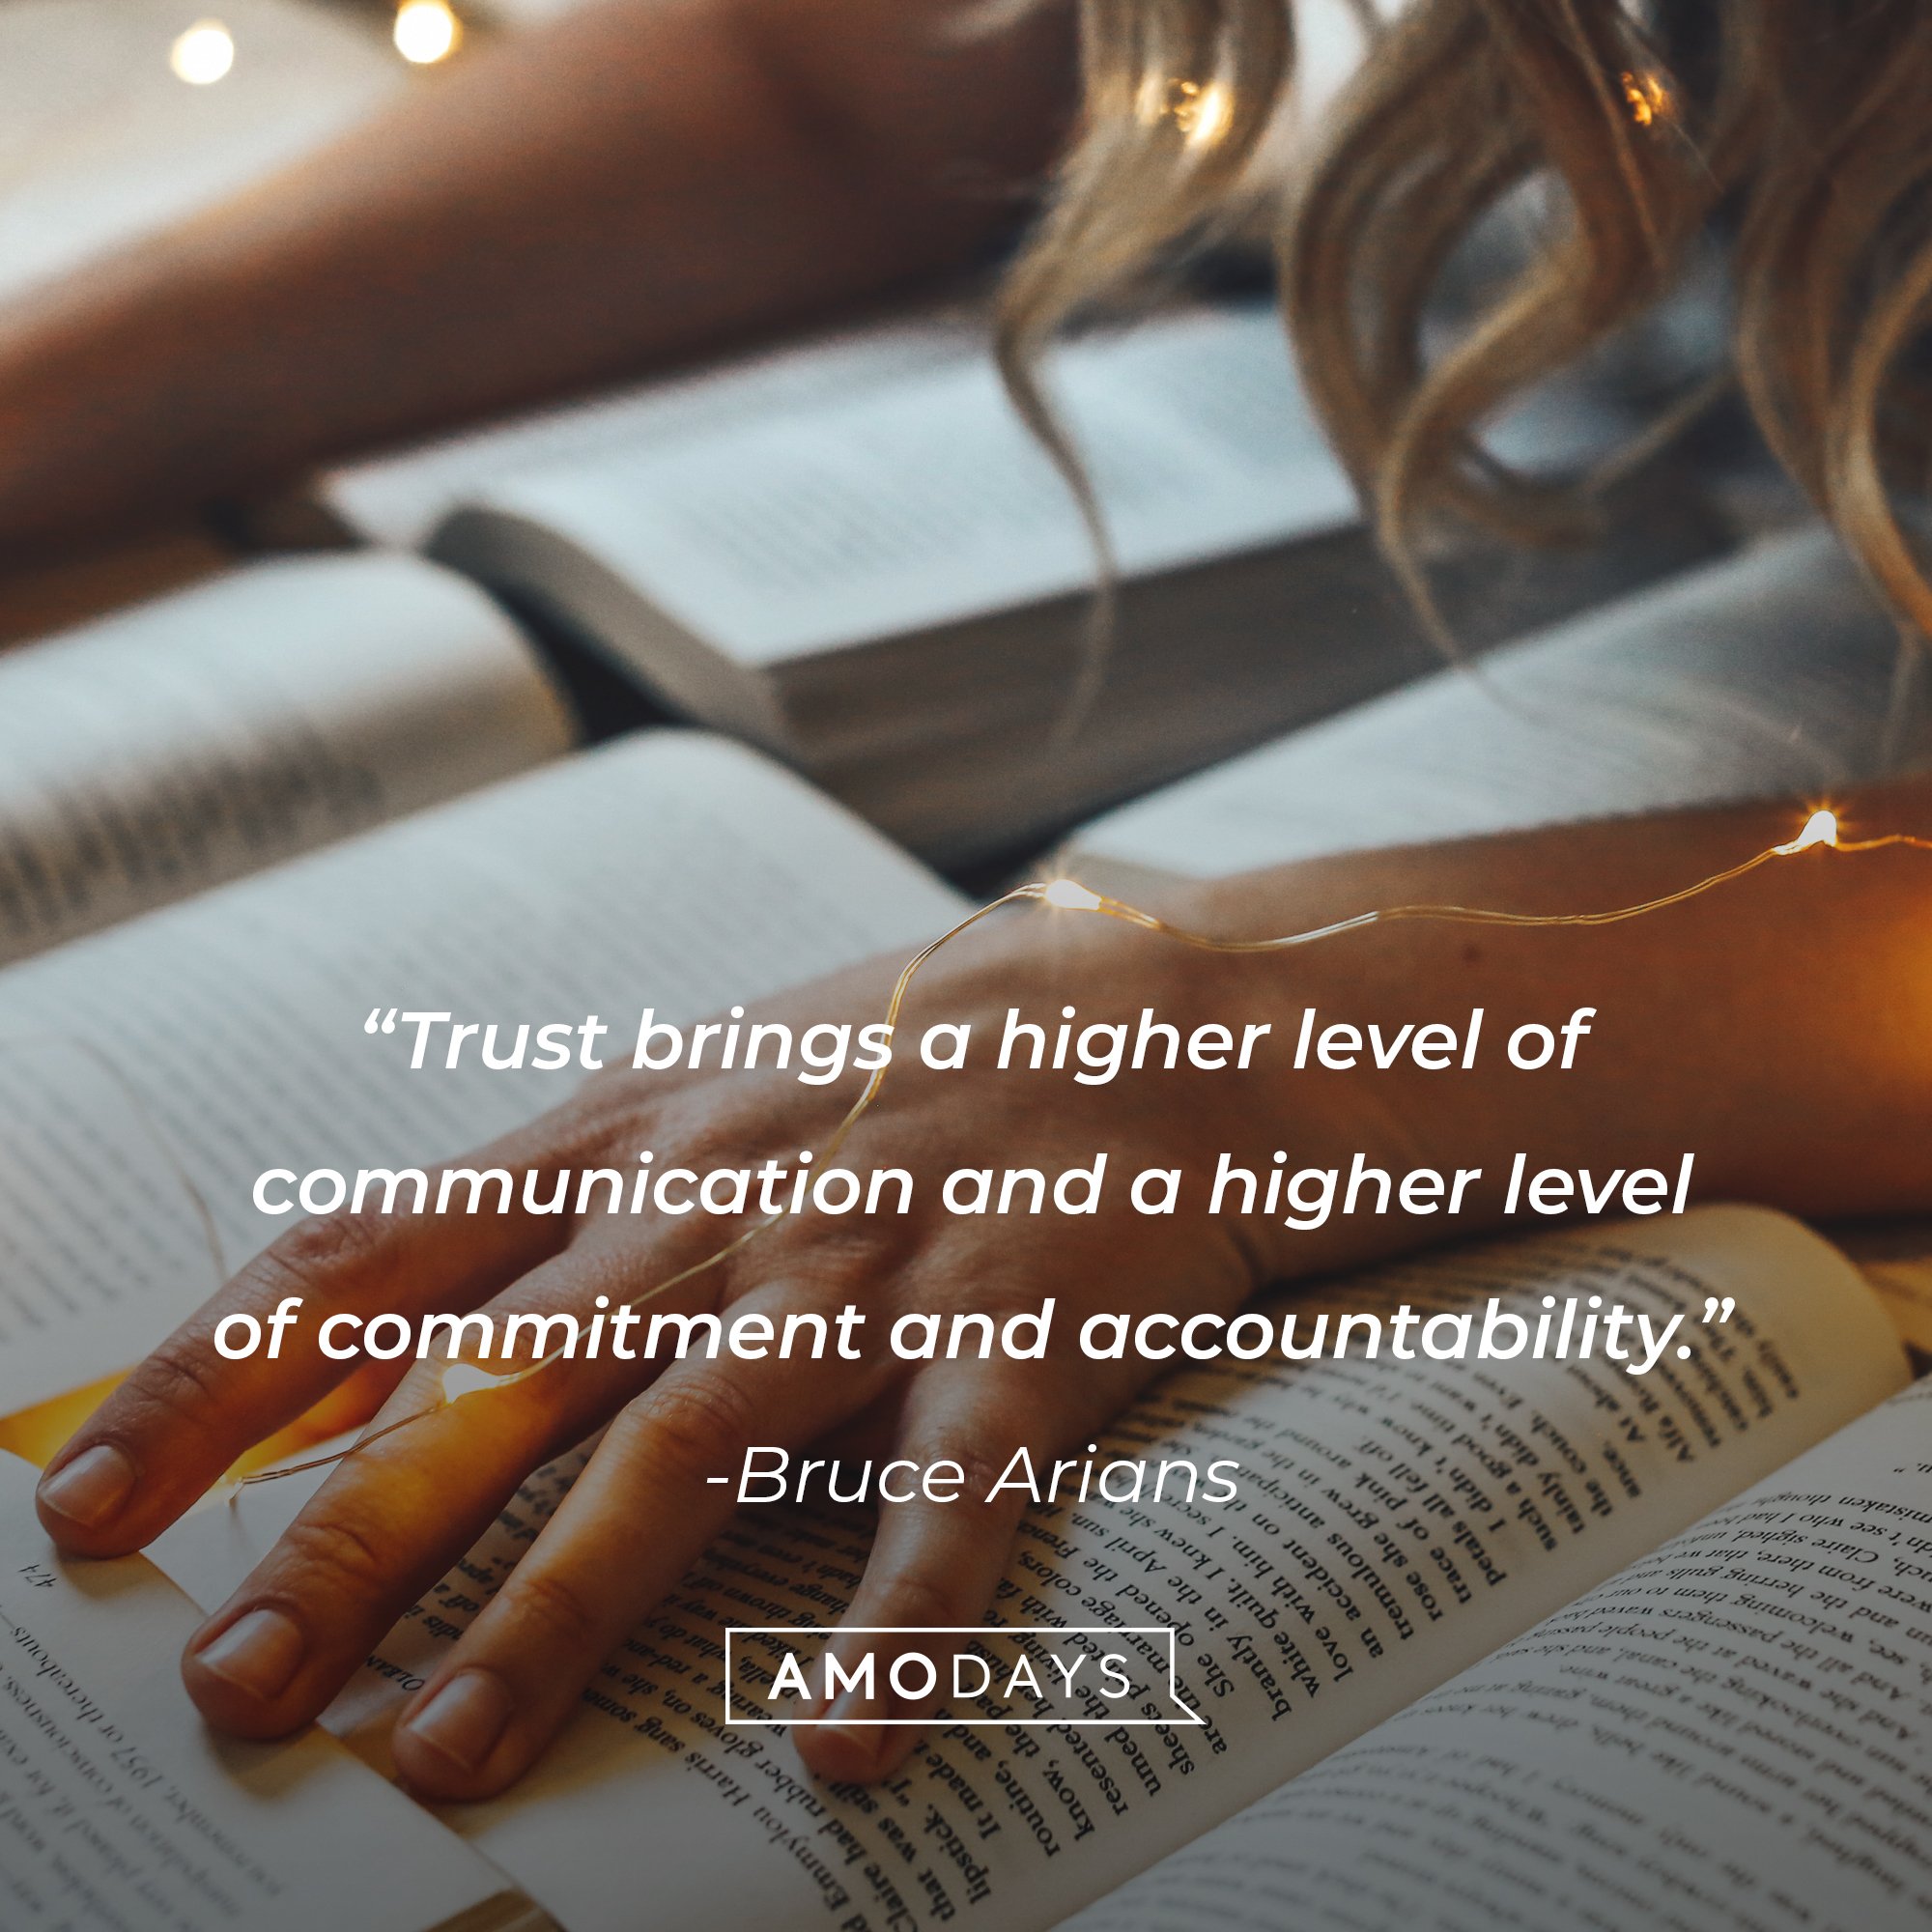 Bruce Arians' quote: “Trust brings a higher level of communication and a higher level of commitment and accountability.” | Image: AmoDays